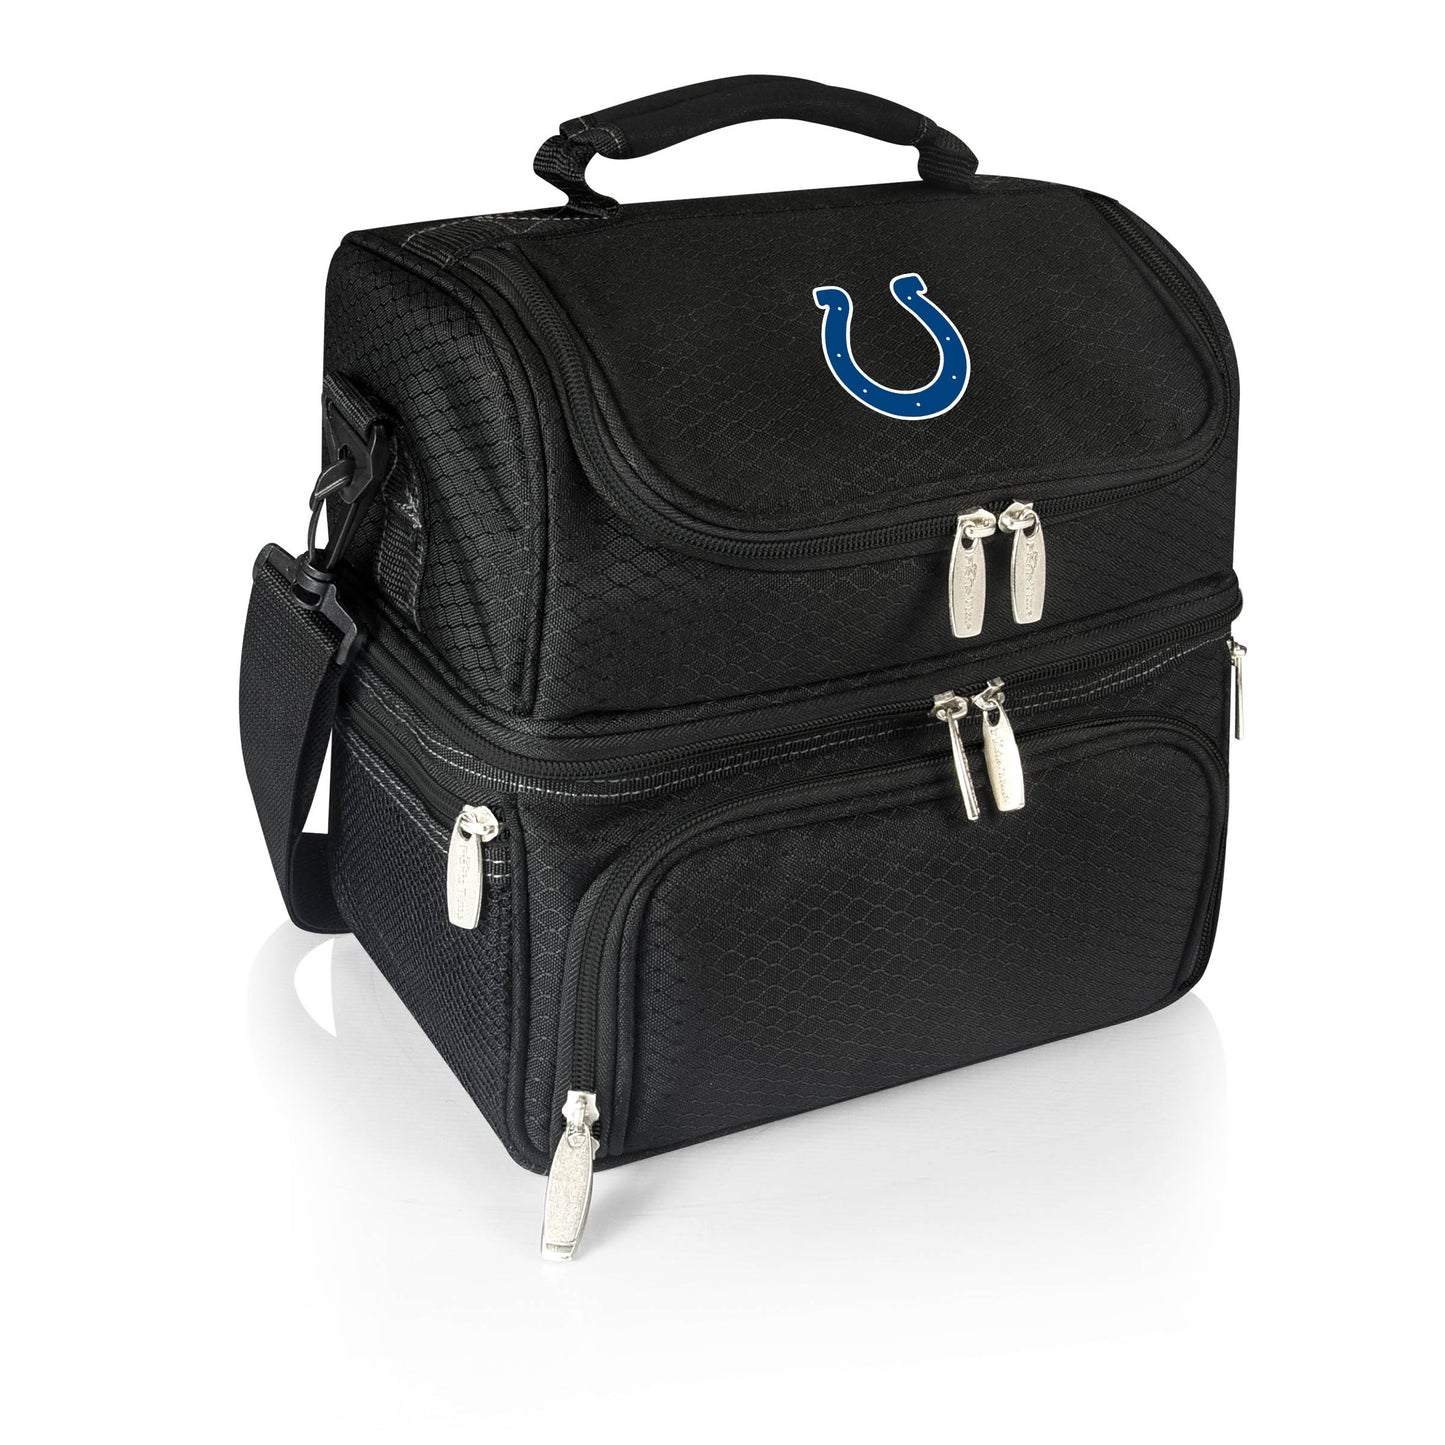 Indianapolis Colts - Pranzo Lunch Cooler Bag